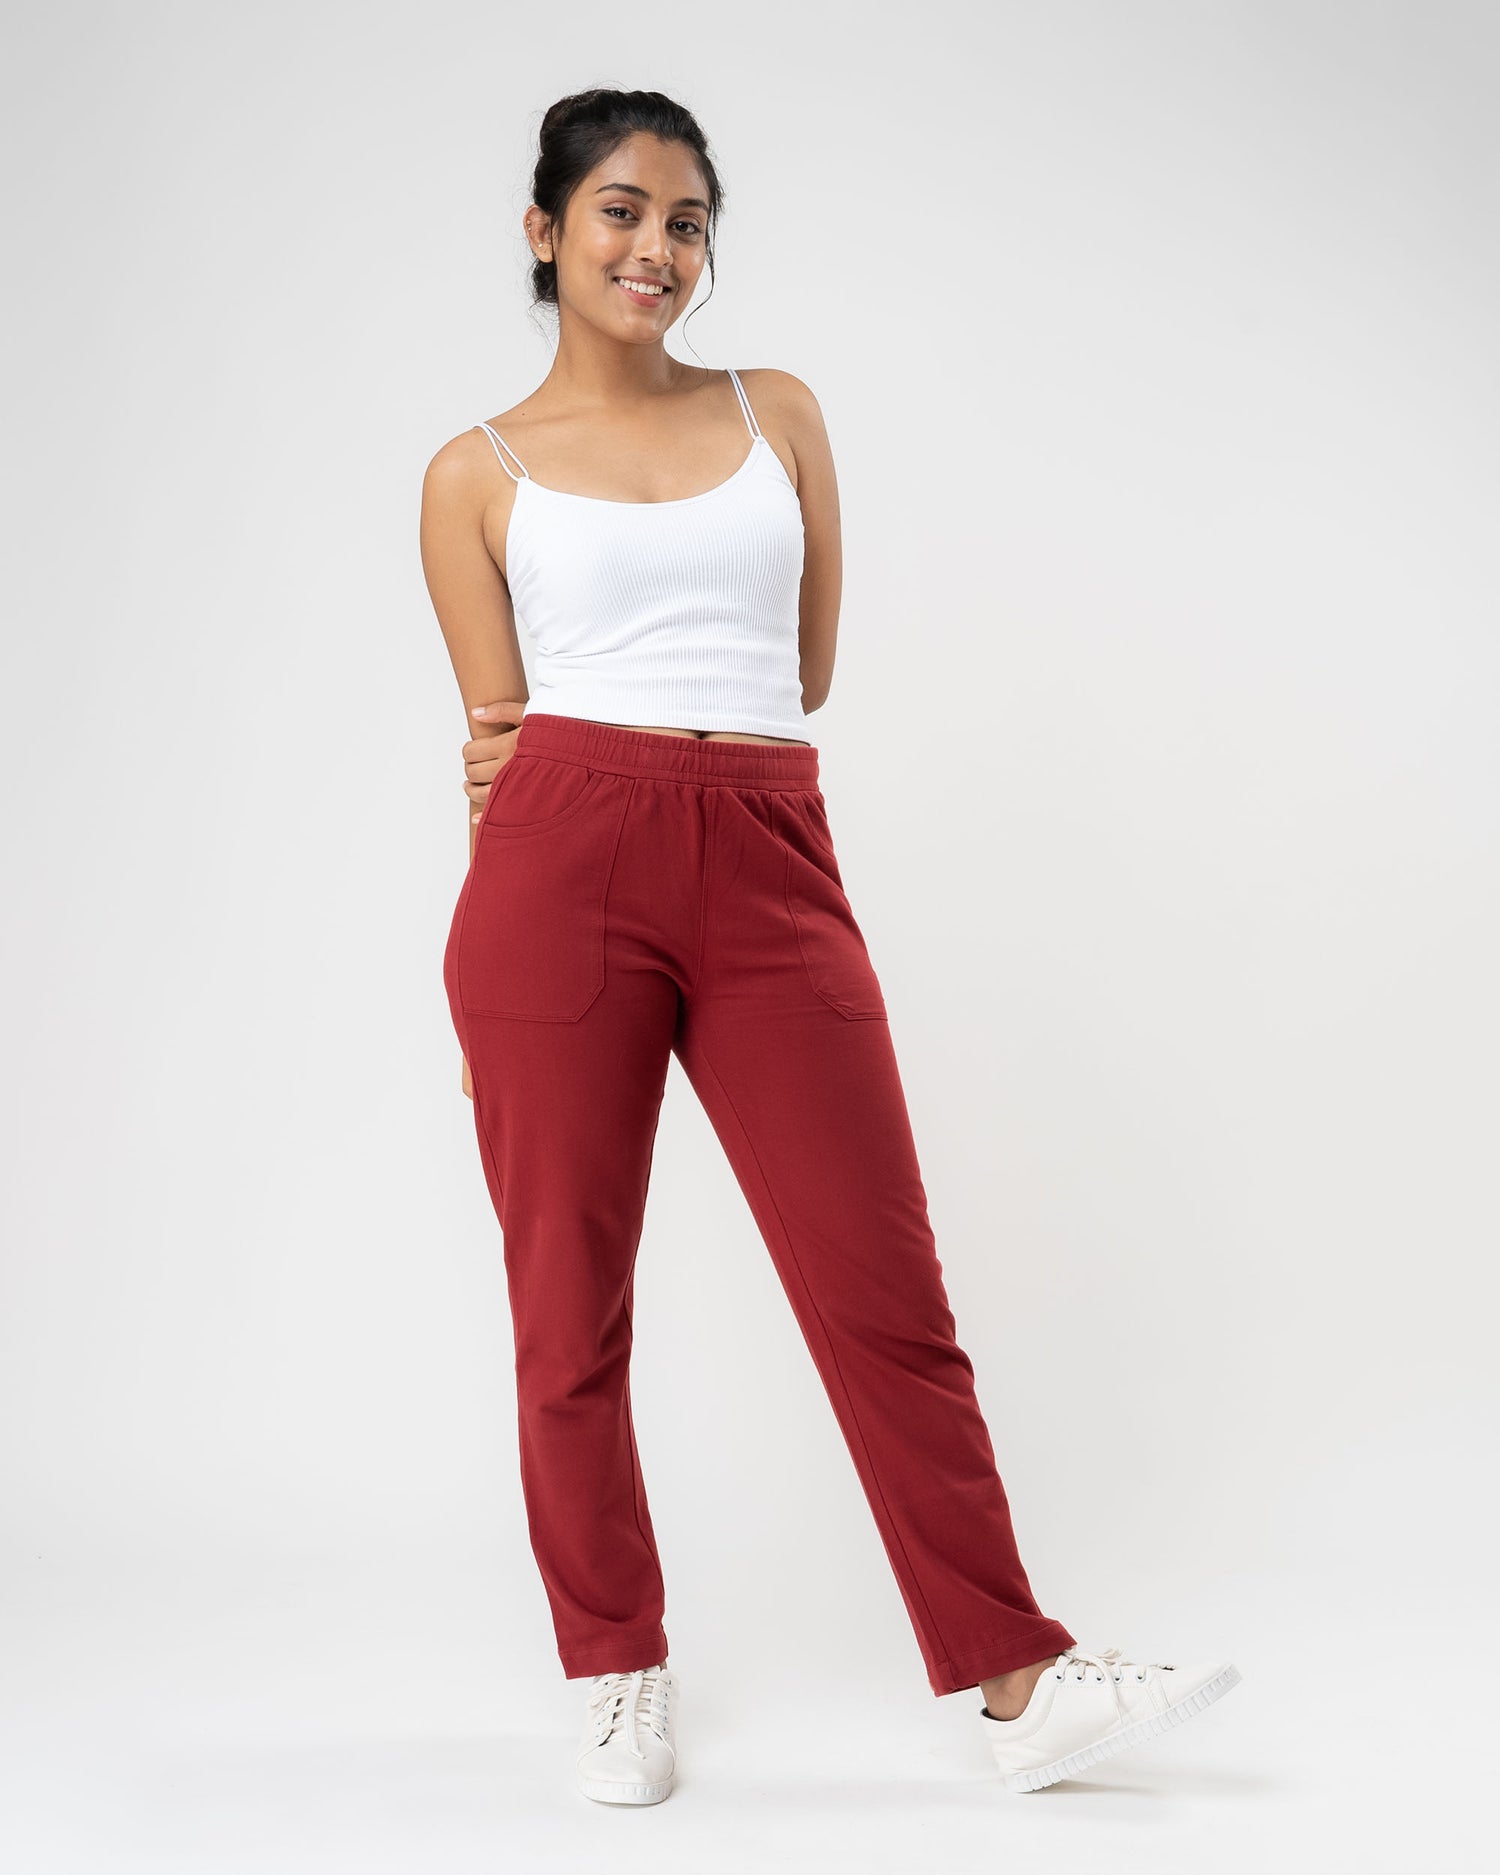 Cotton pants for women Red